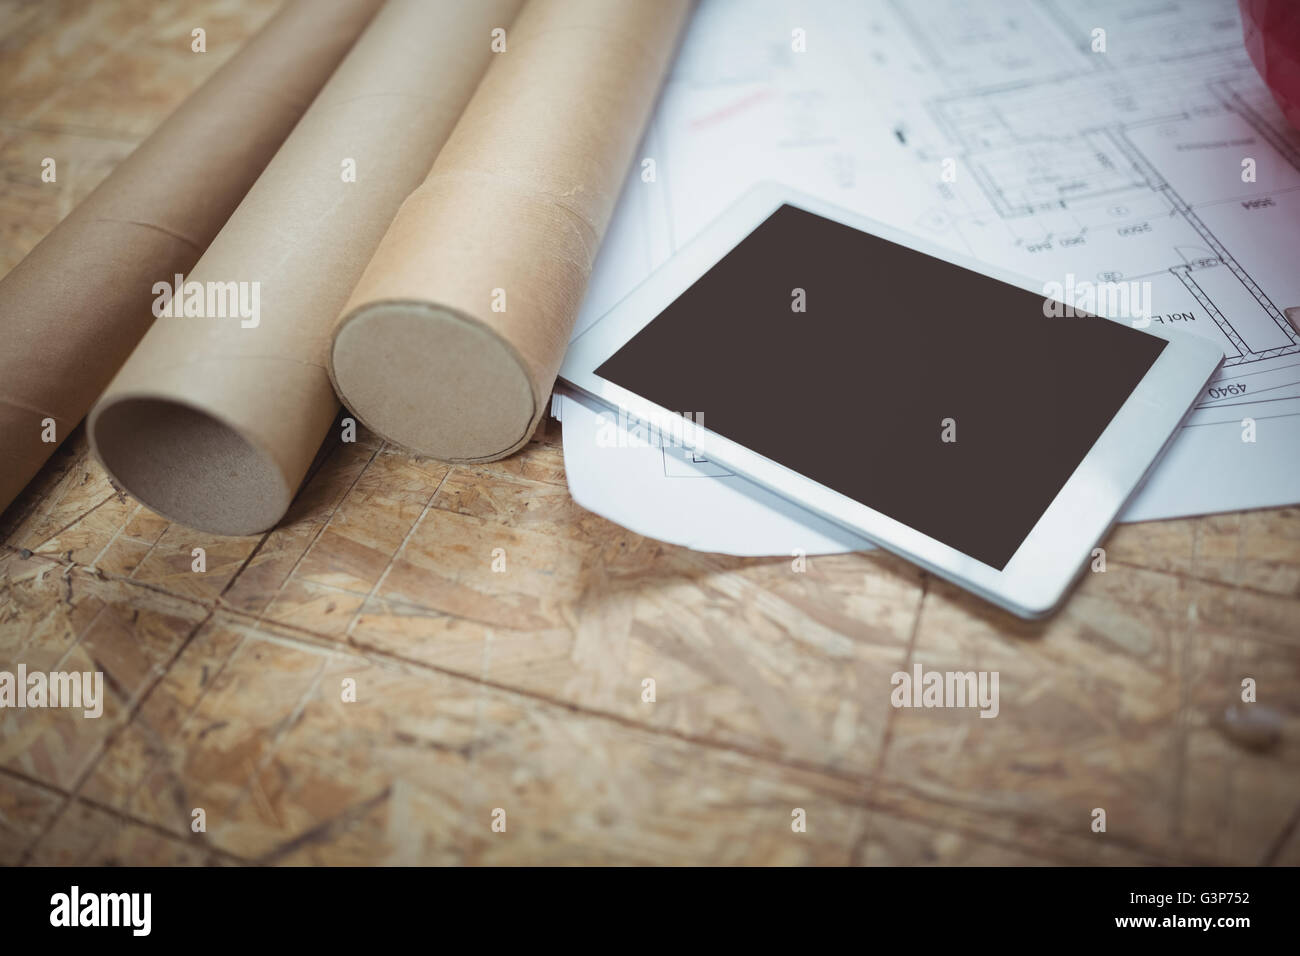 Digital tablet and blueprint on a table Stock Photo